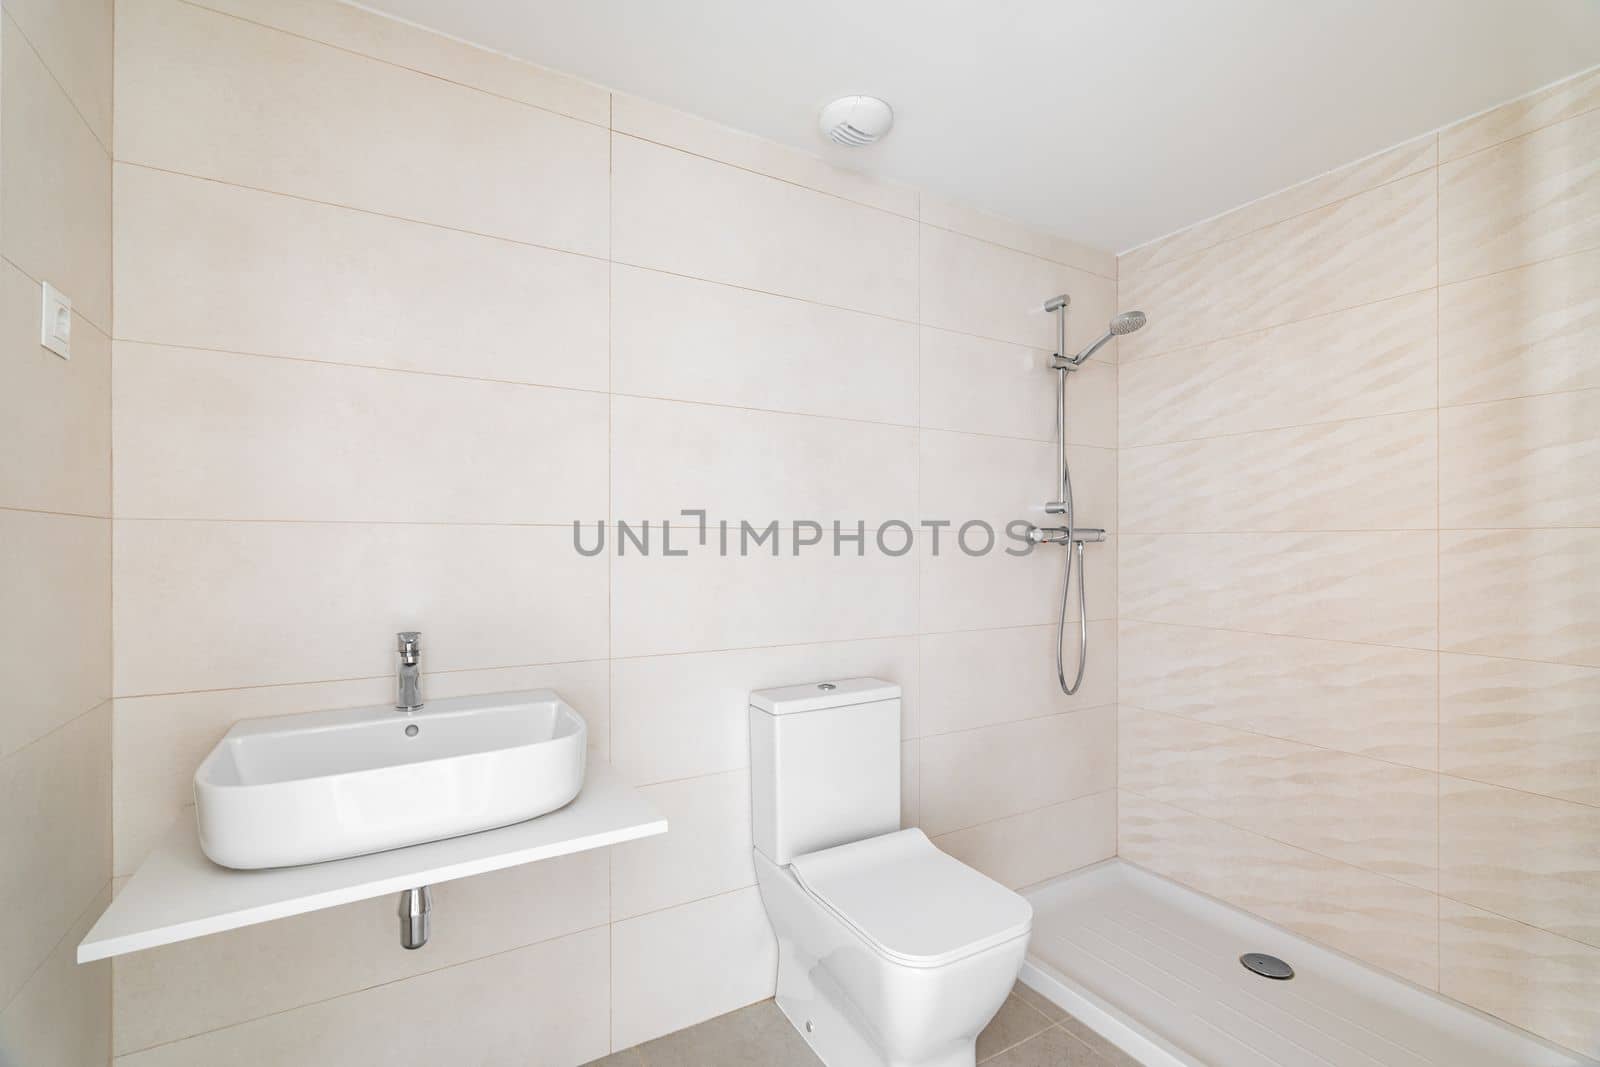 Modern bathroom in white beige tones tile with vanity sink and an open shower in hotel or new apartment. Concept of stylish bathroom interiors with natural light by apavlin